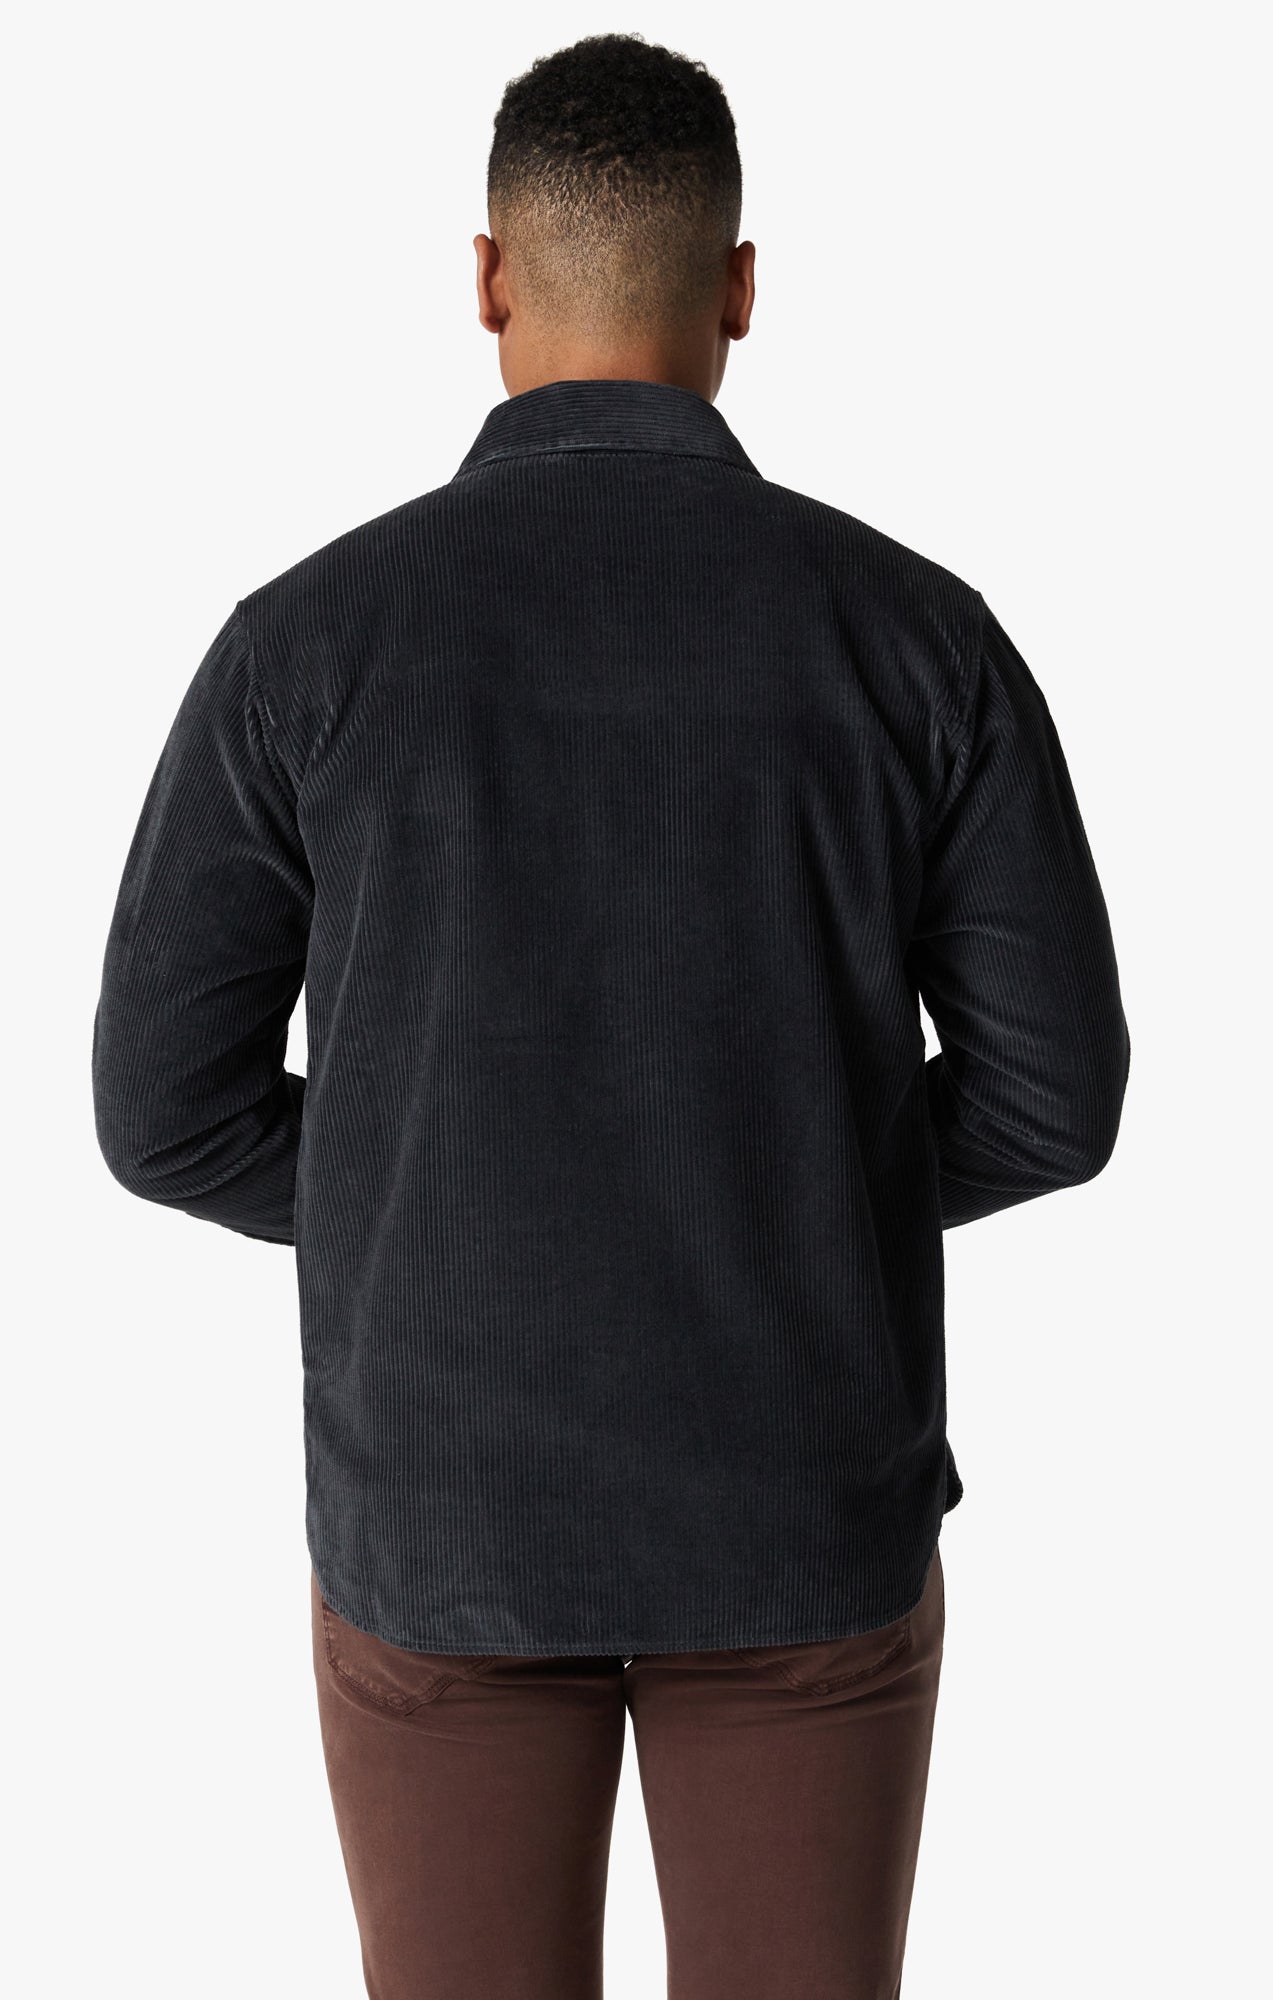 Overshirt In Charcoal Image 3